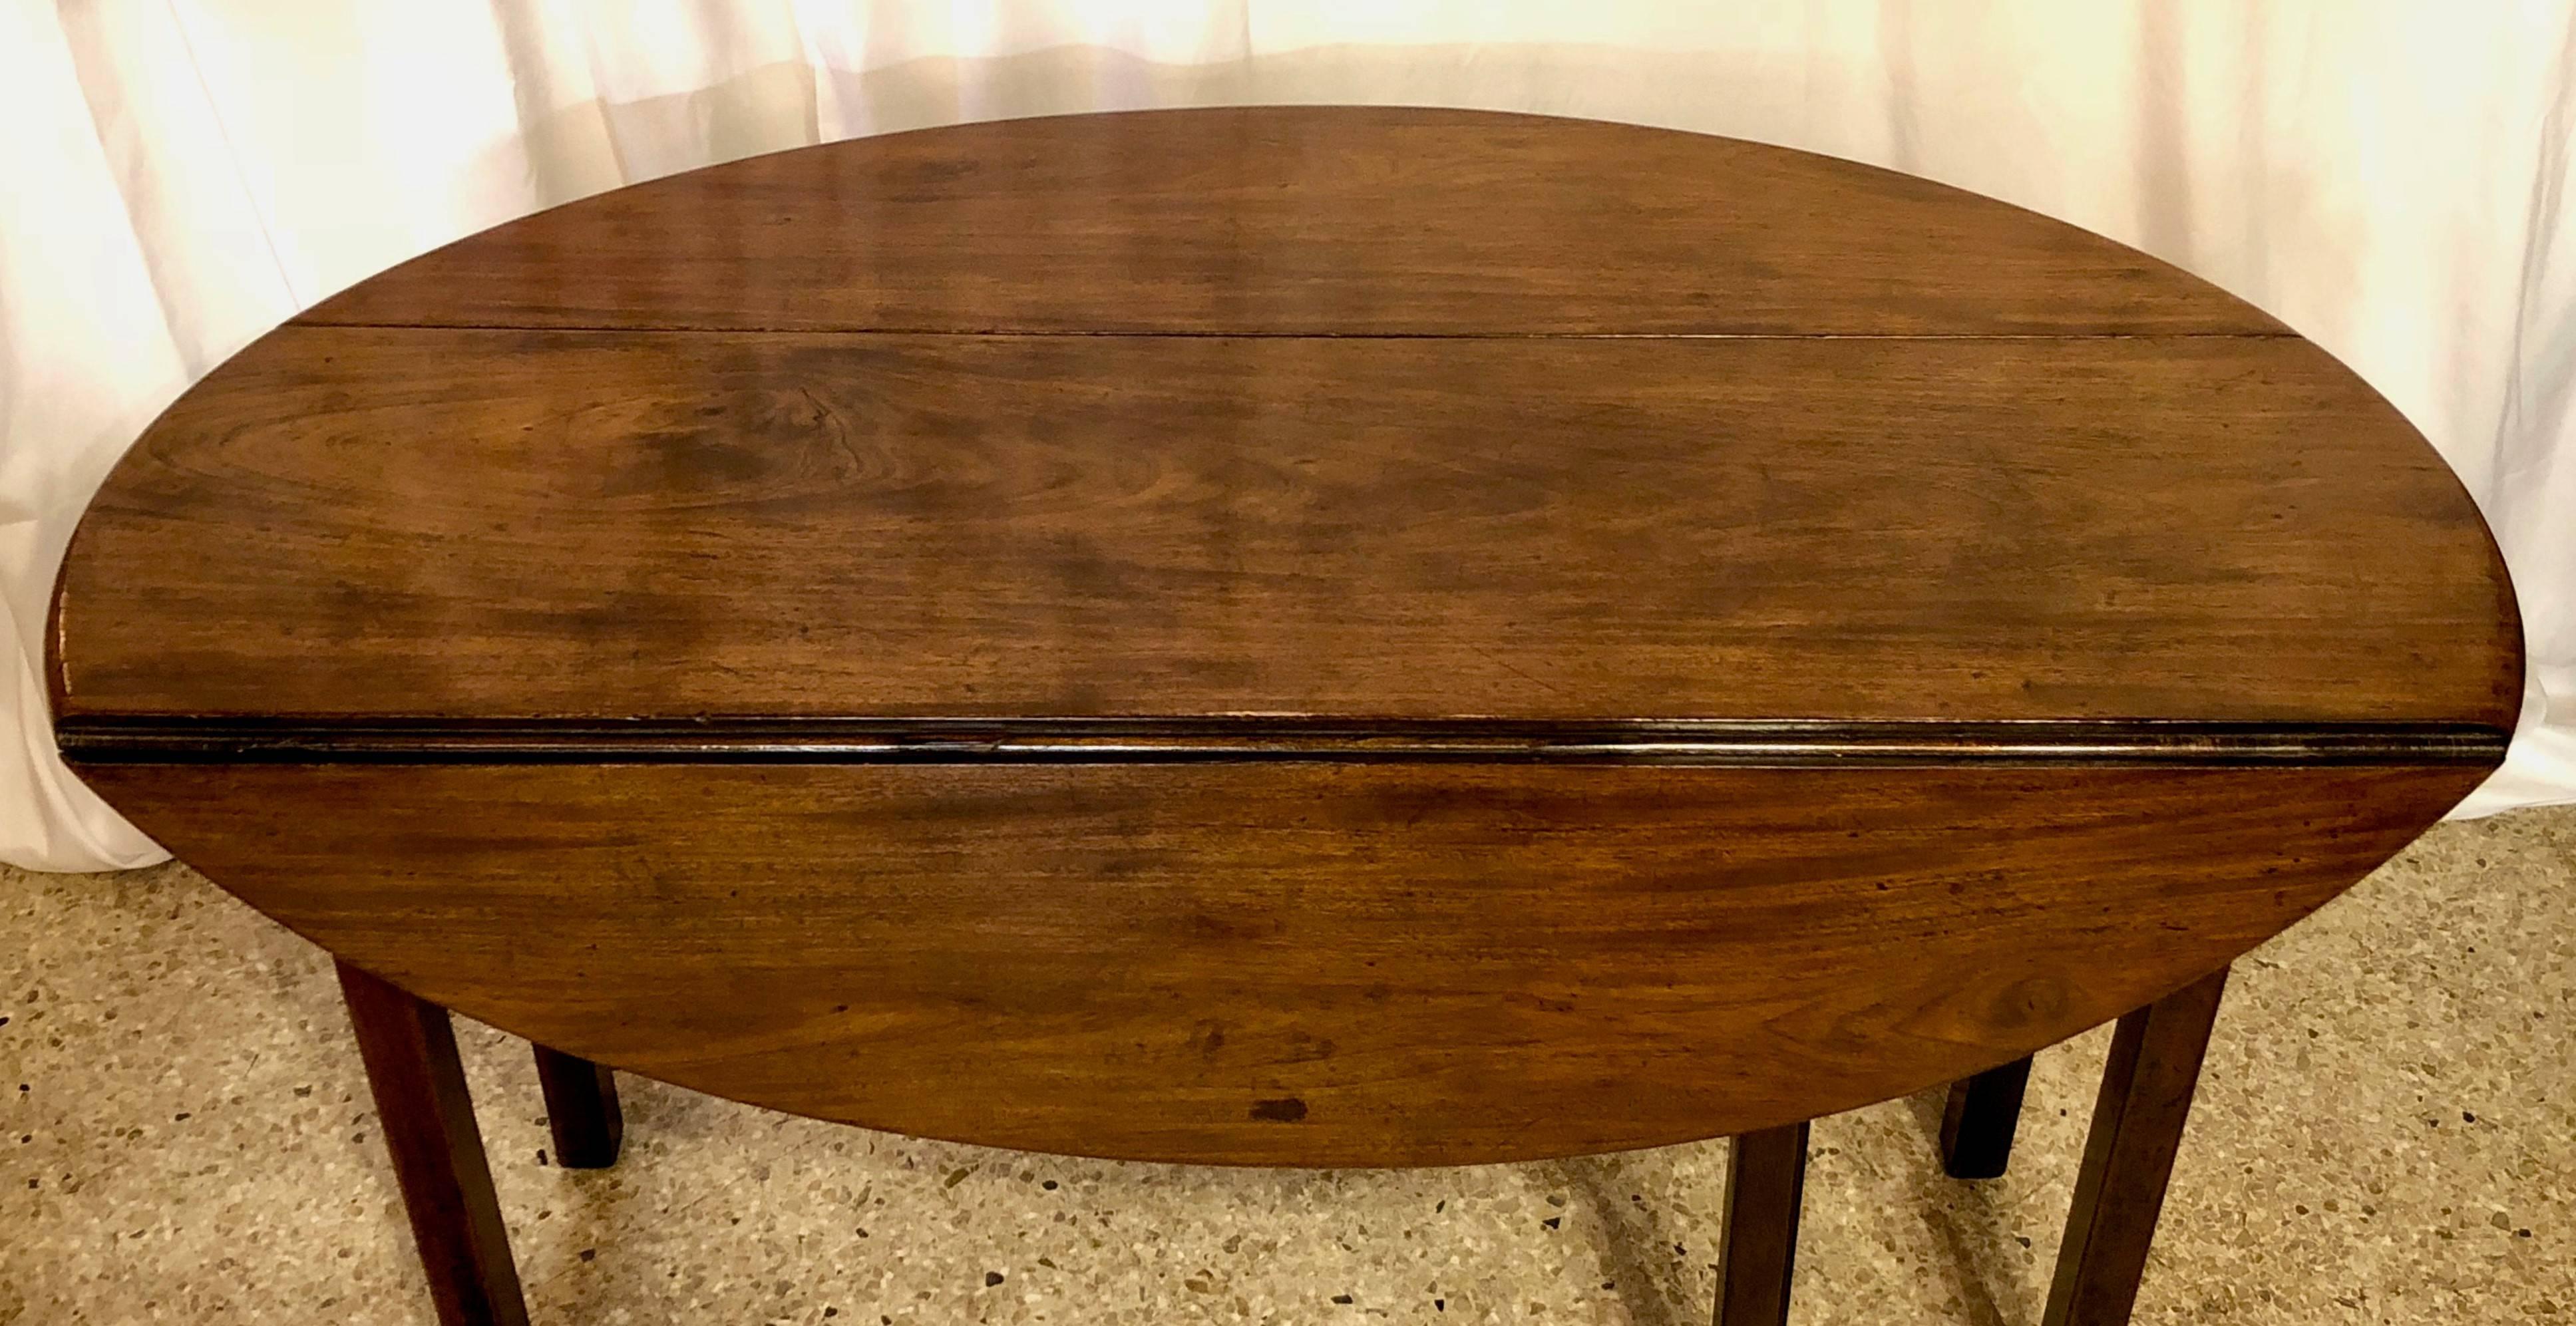 Antique Irish George III Mahogany Drop-Leaf Table In Good Condition For Sale In New Orleans, LA